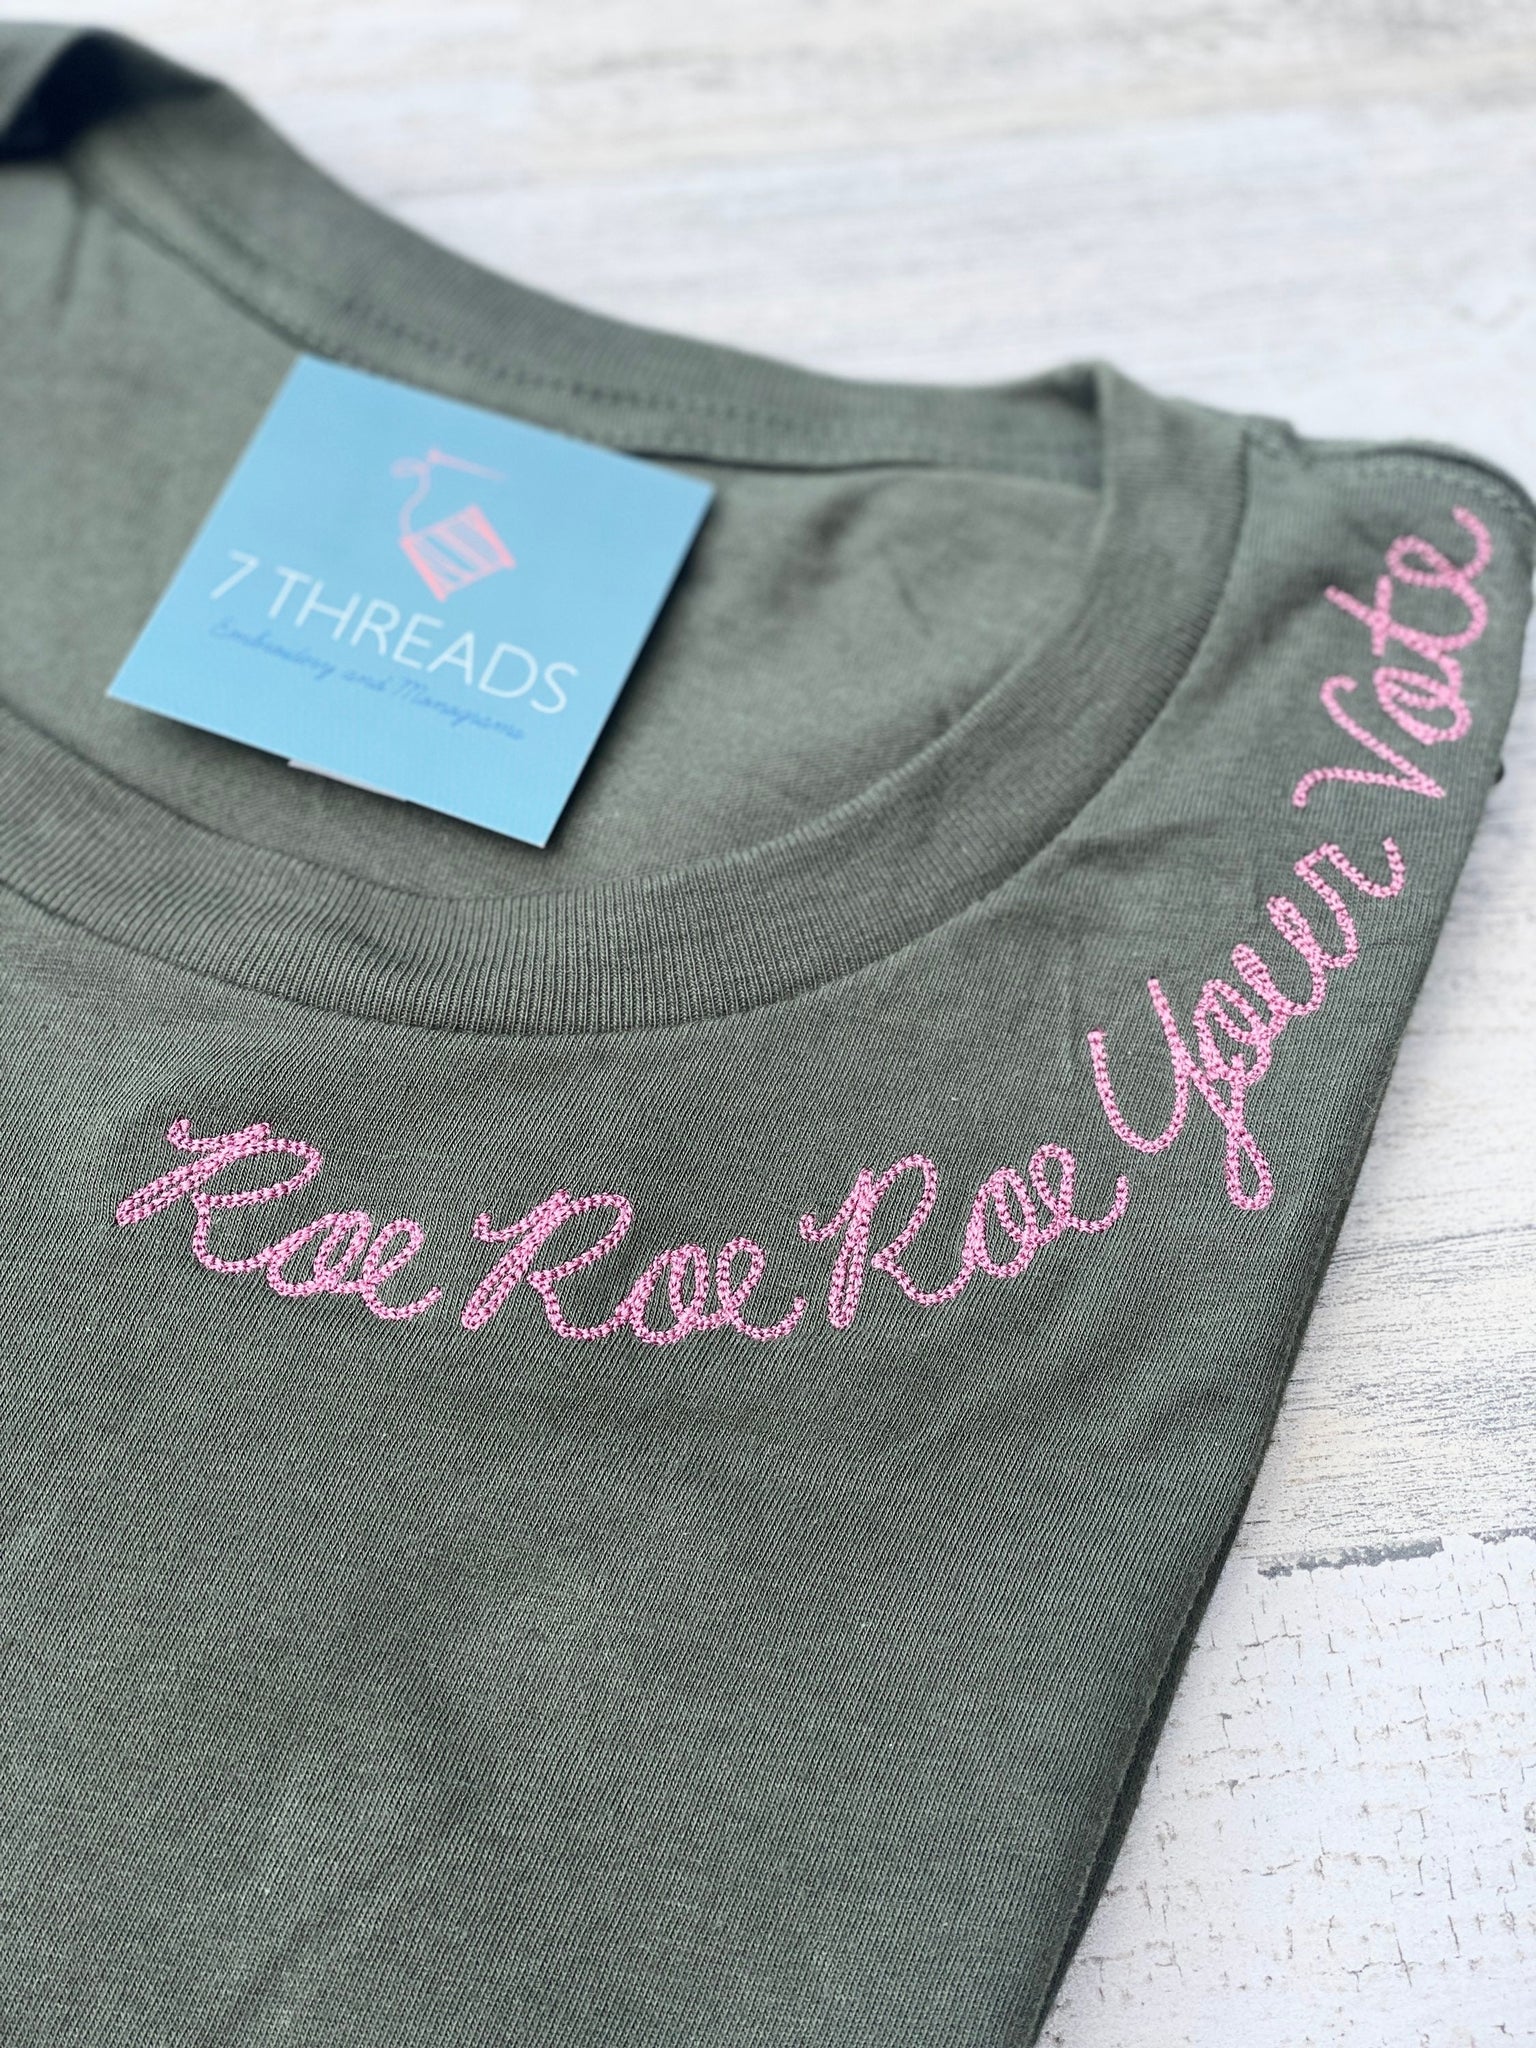 Roe Roe Roe Your Vote TShirt, Womens Rights  Shirt, Supreme Court Unisex Tee, Liberal Justice Warrior Feminist Gift